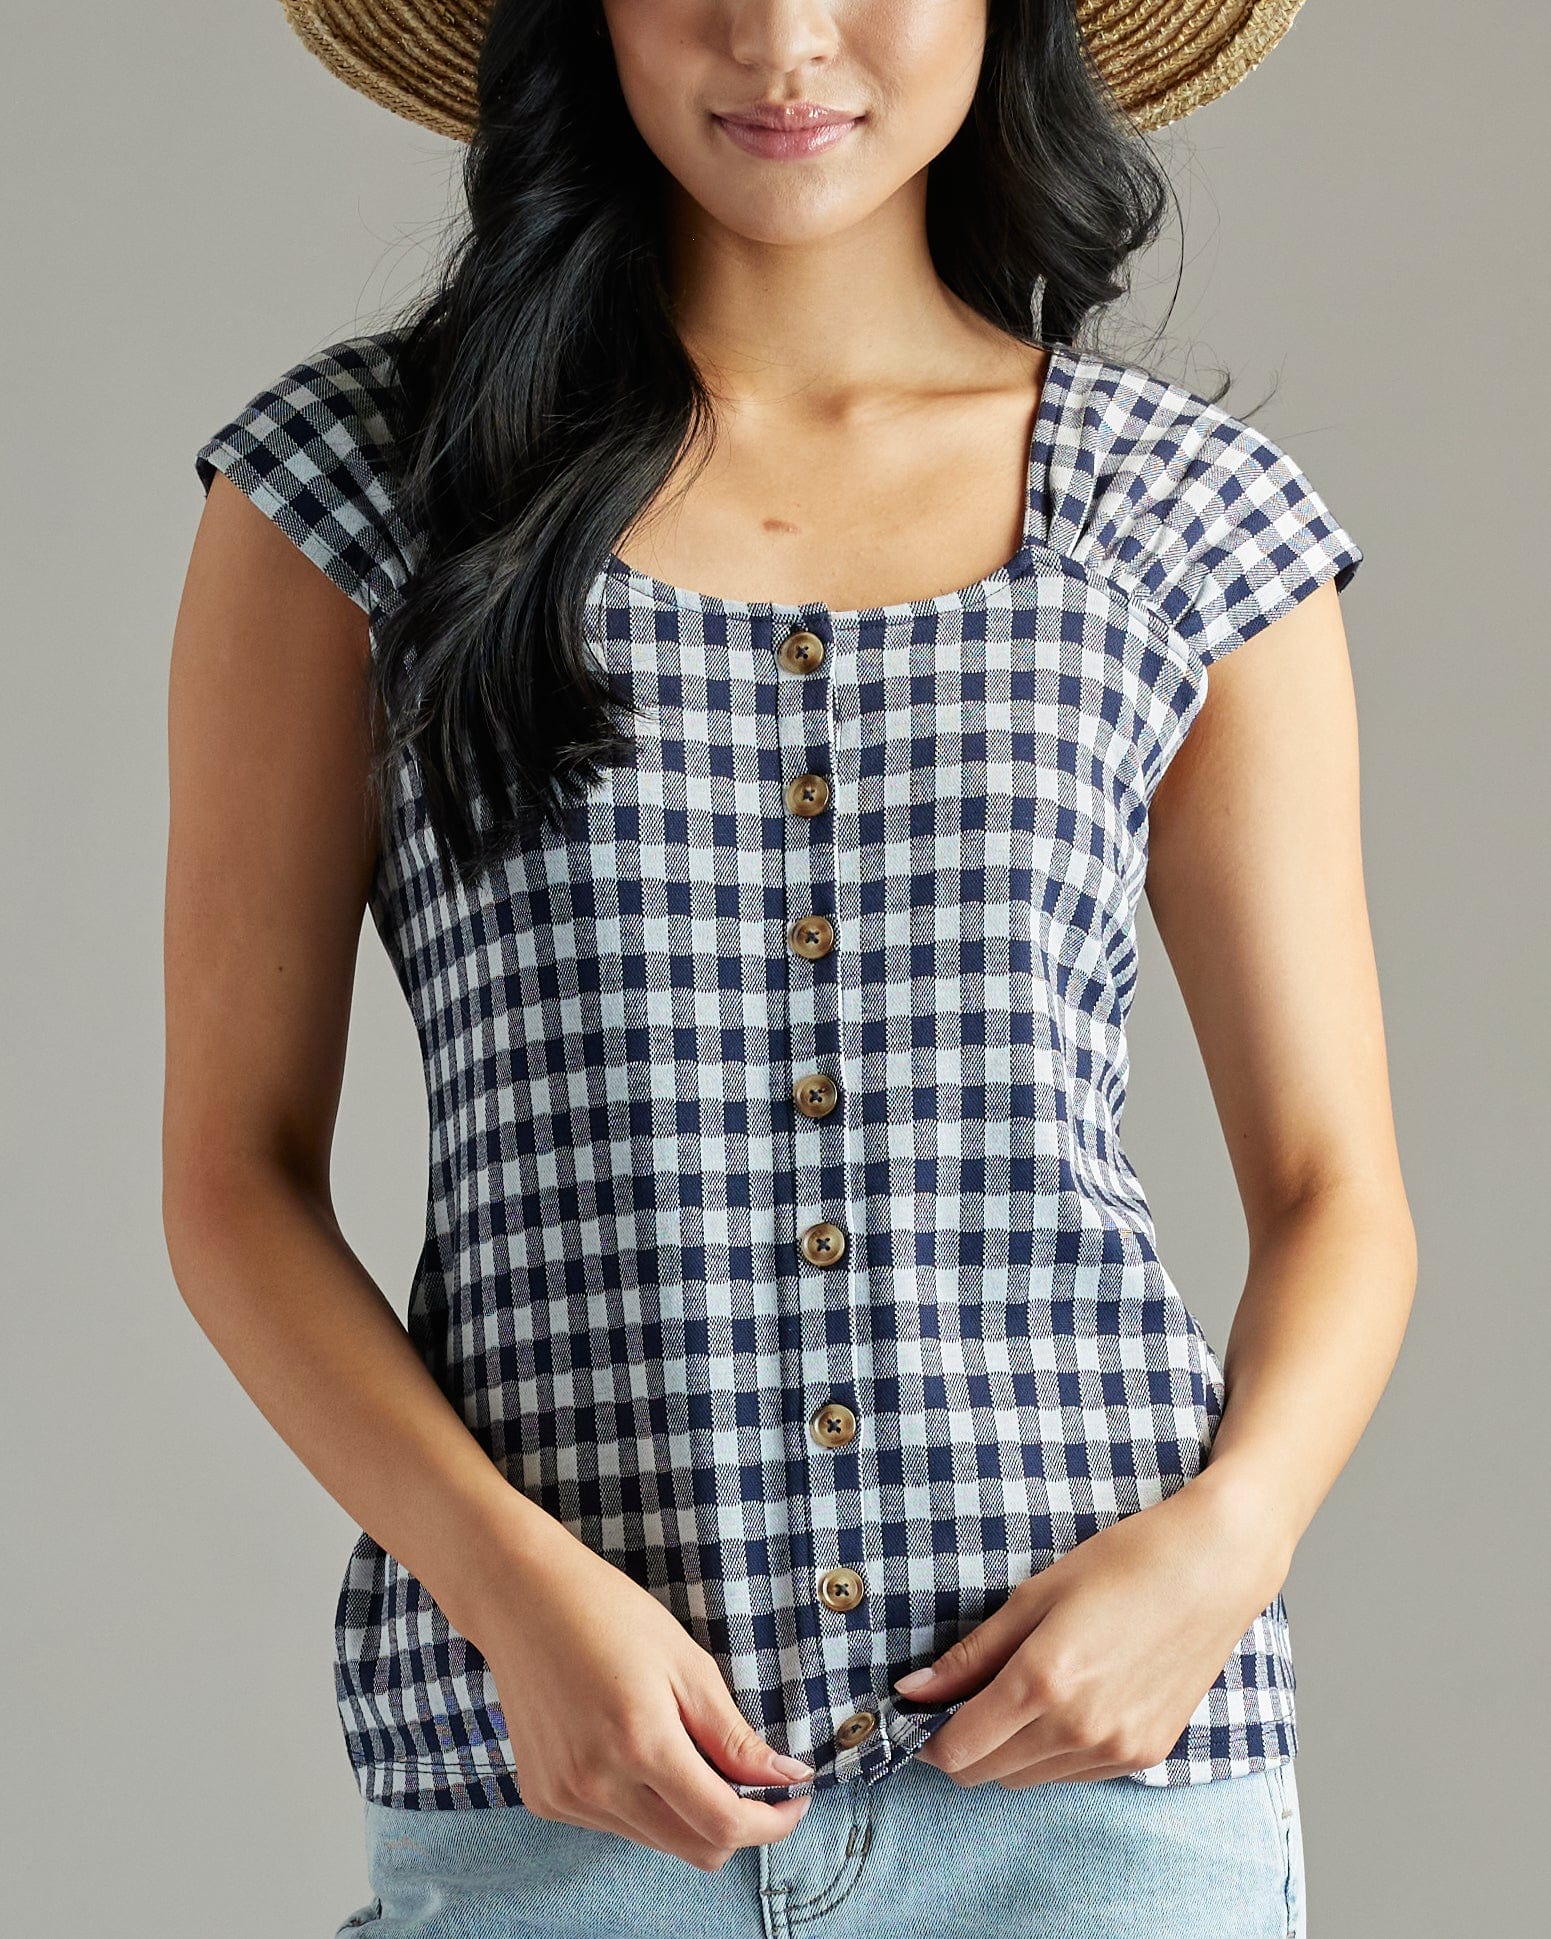 Woman in a navy and white gingham blouse with short sleeves and buttons down the front